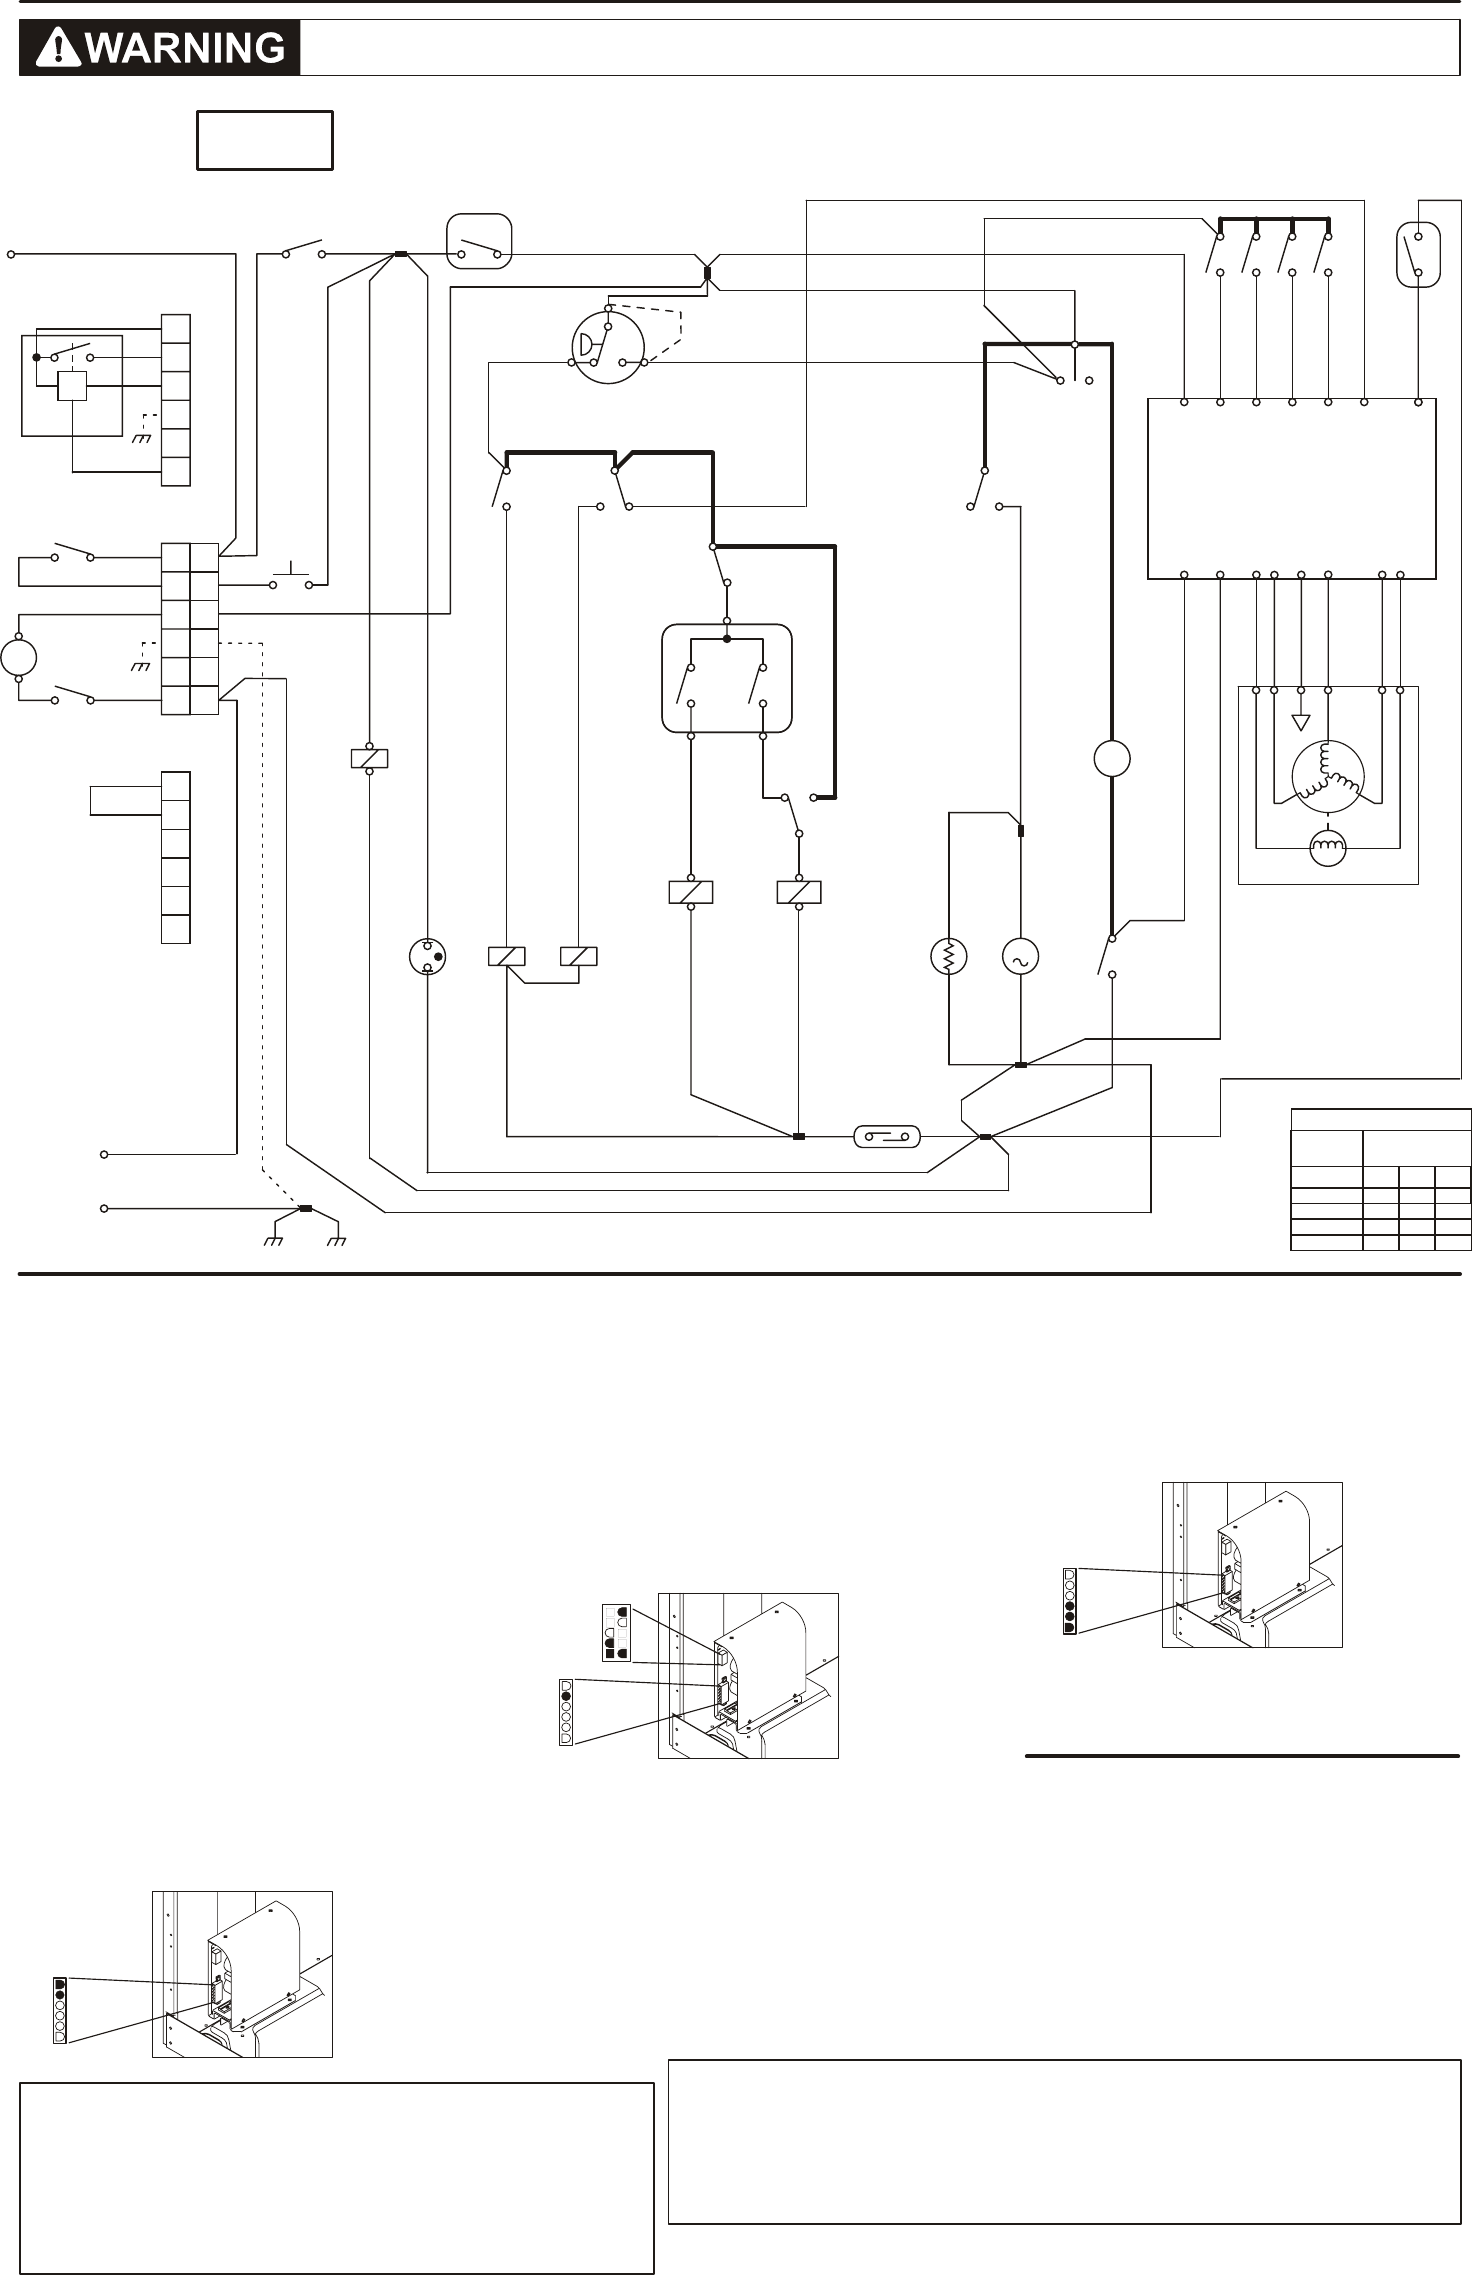 Wiring Diagram For Kenmore Washer Irish Connections